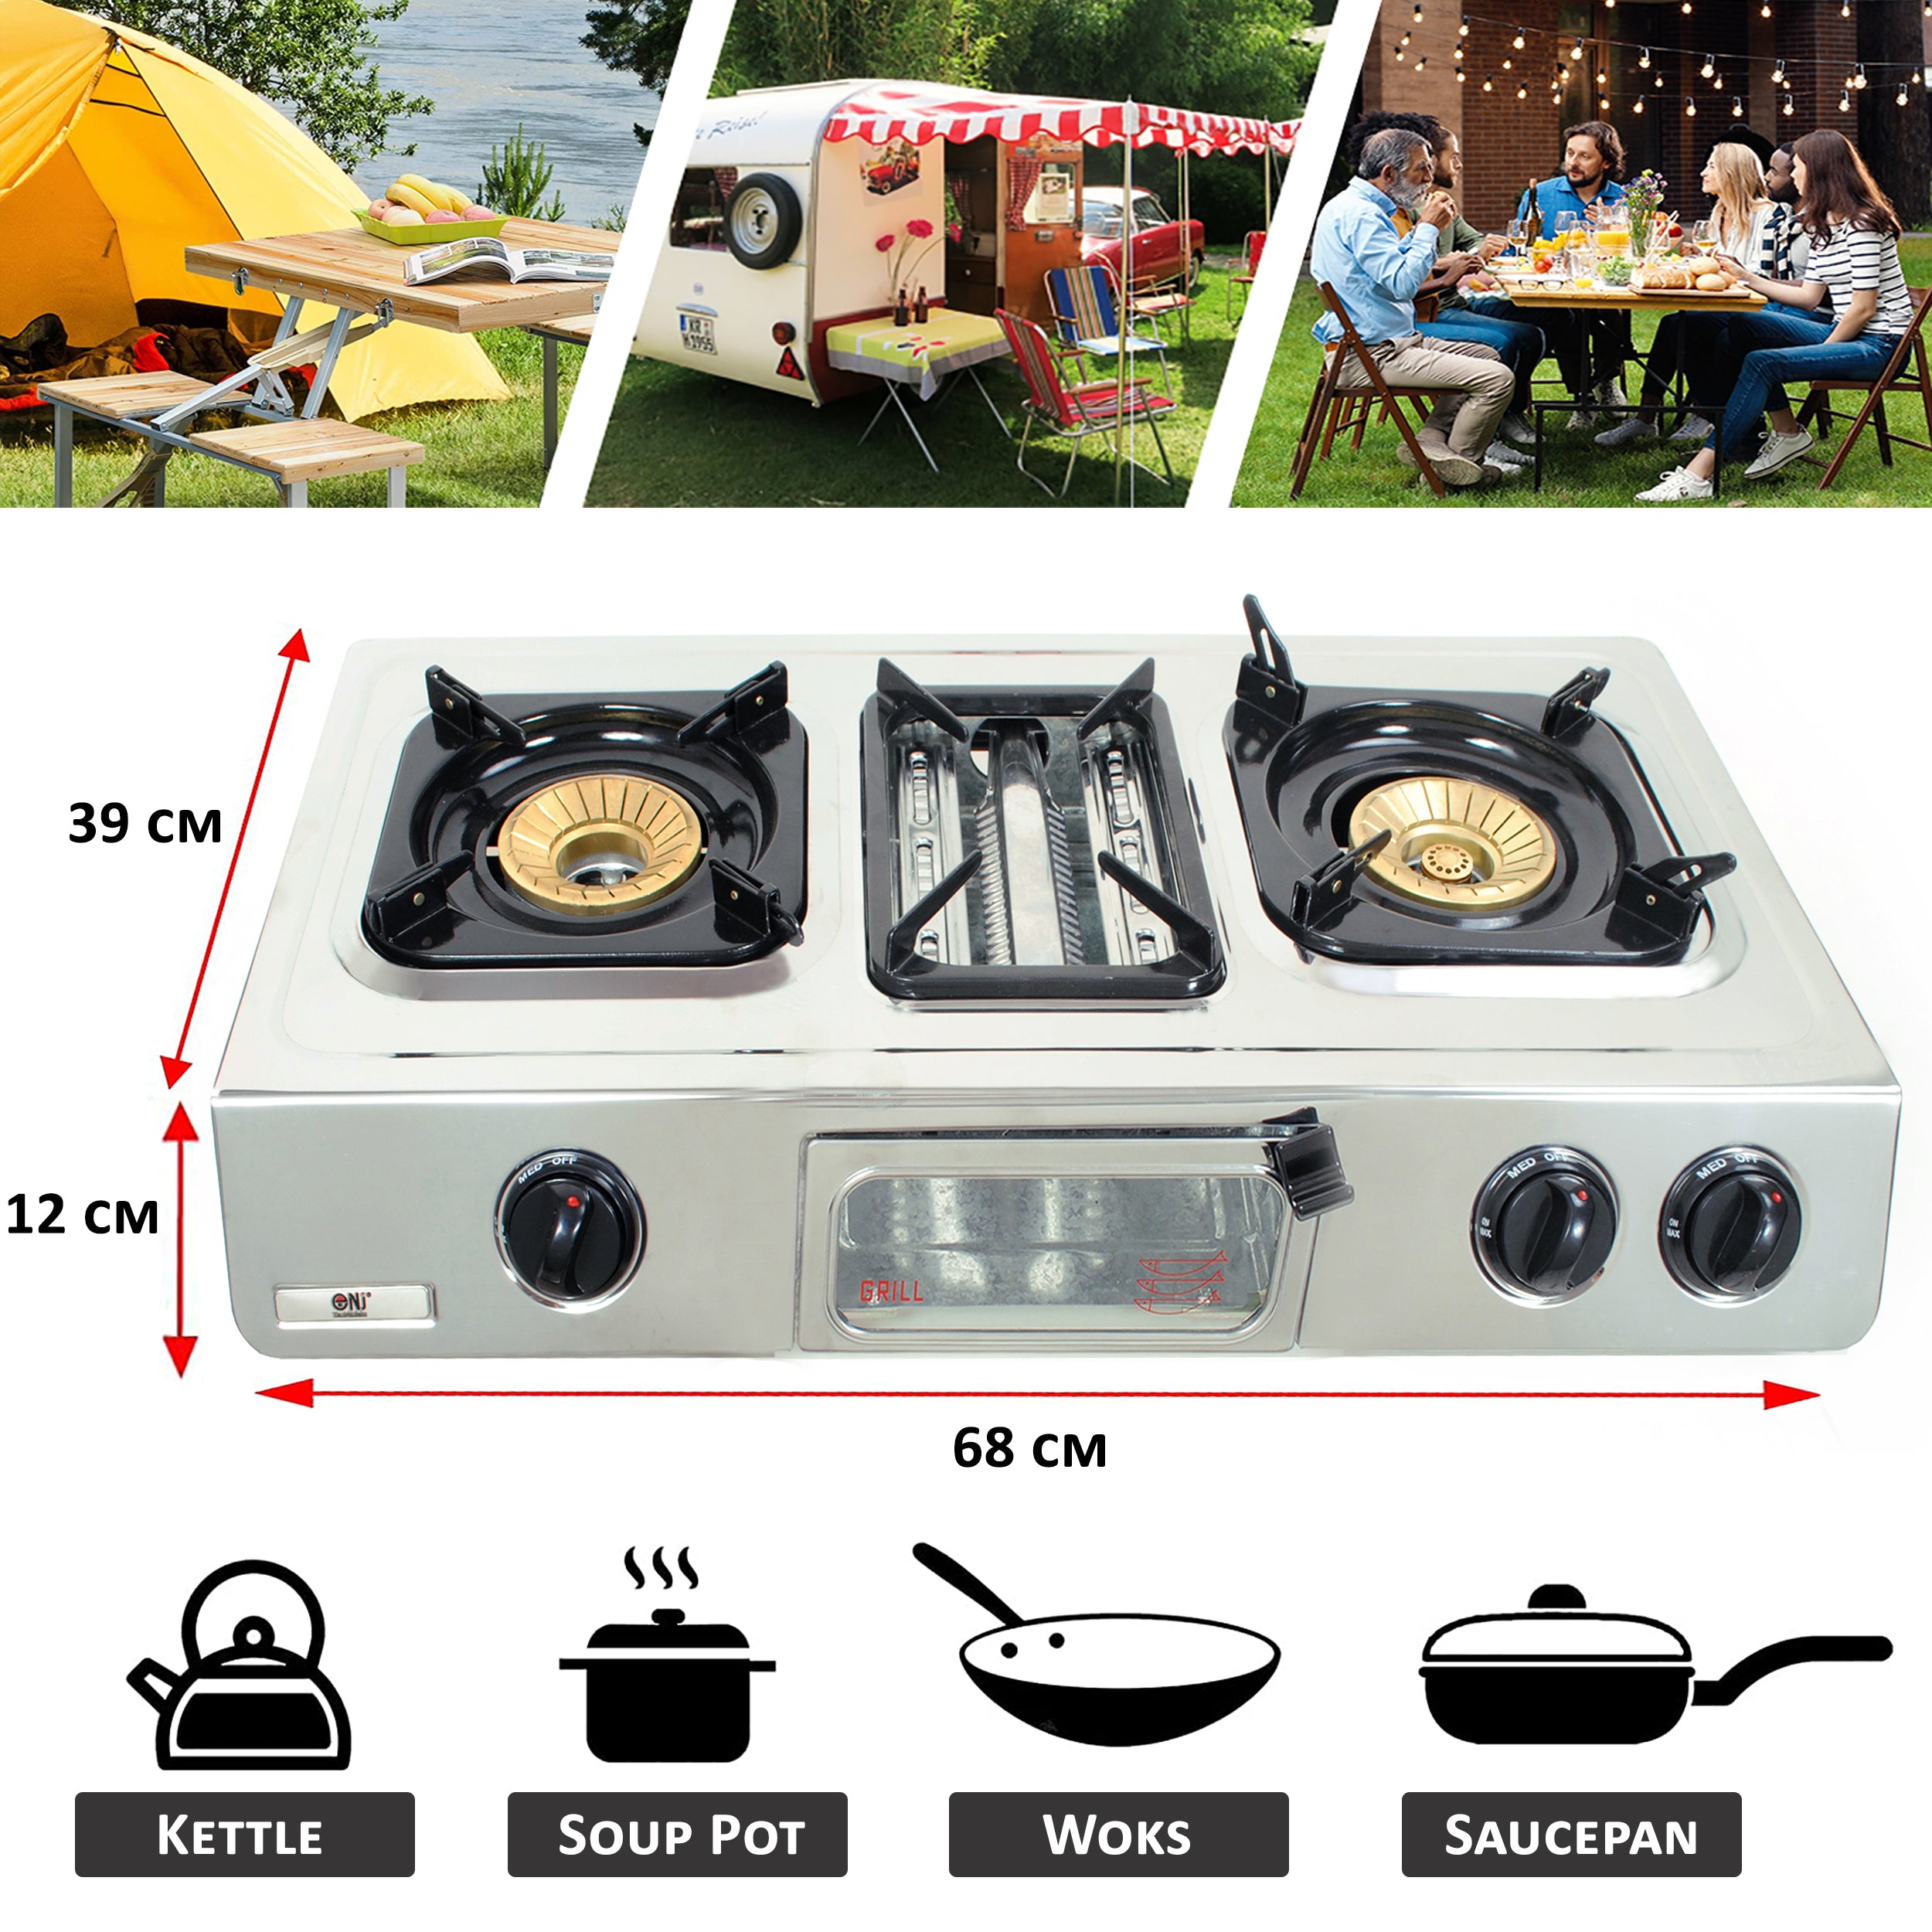 PORTABLE GAS KITCHEN 1 OVEN BURNER ELECTRONIC IGNITION BARBECUE CAMPING